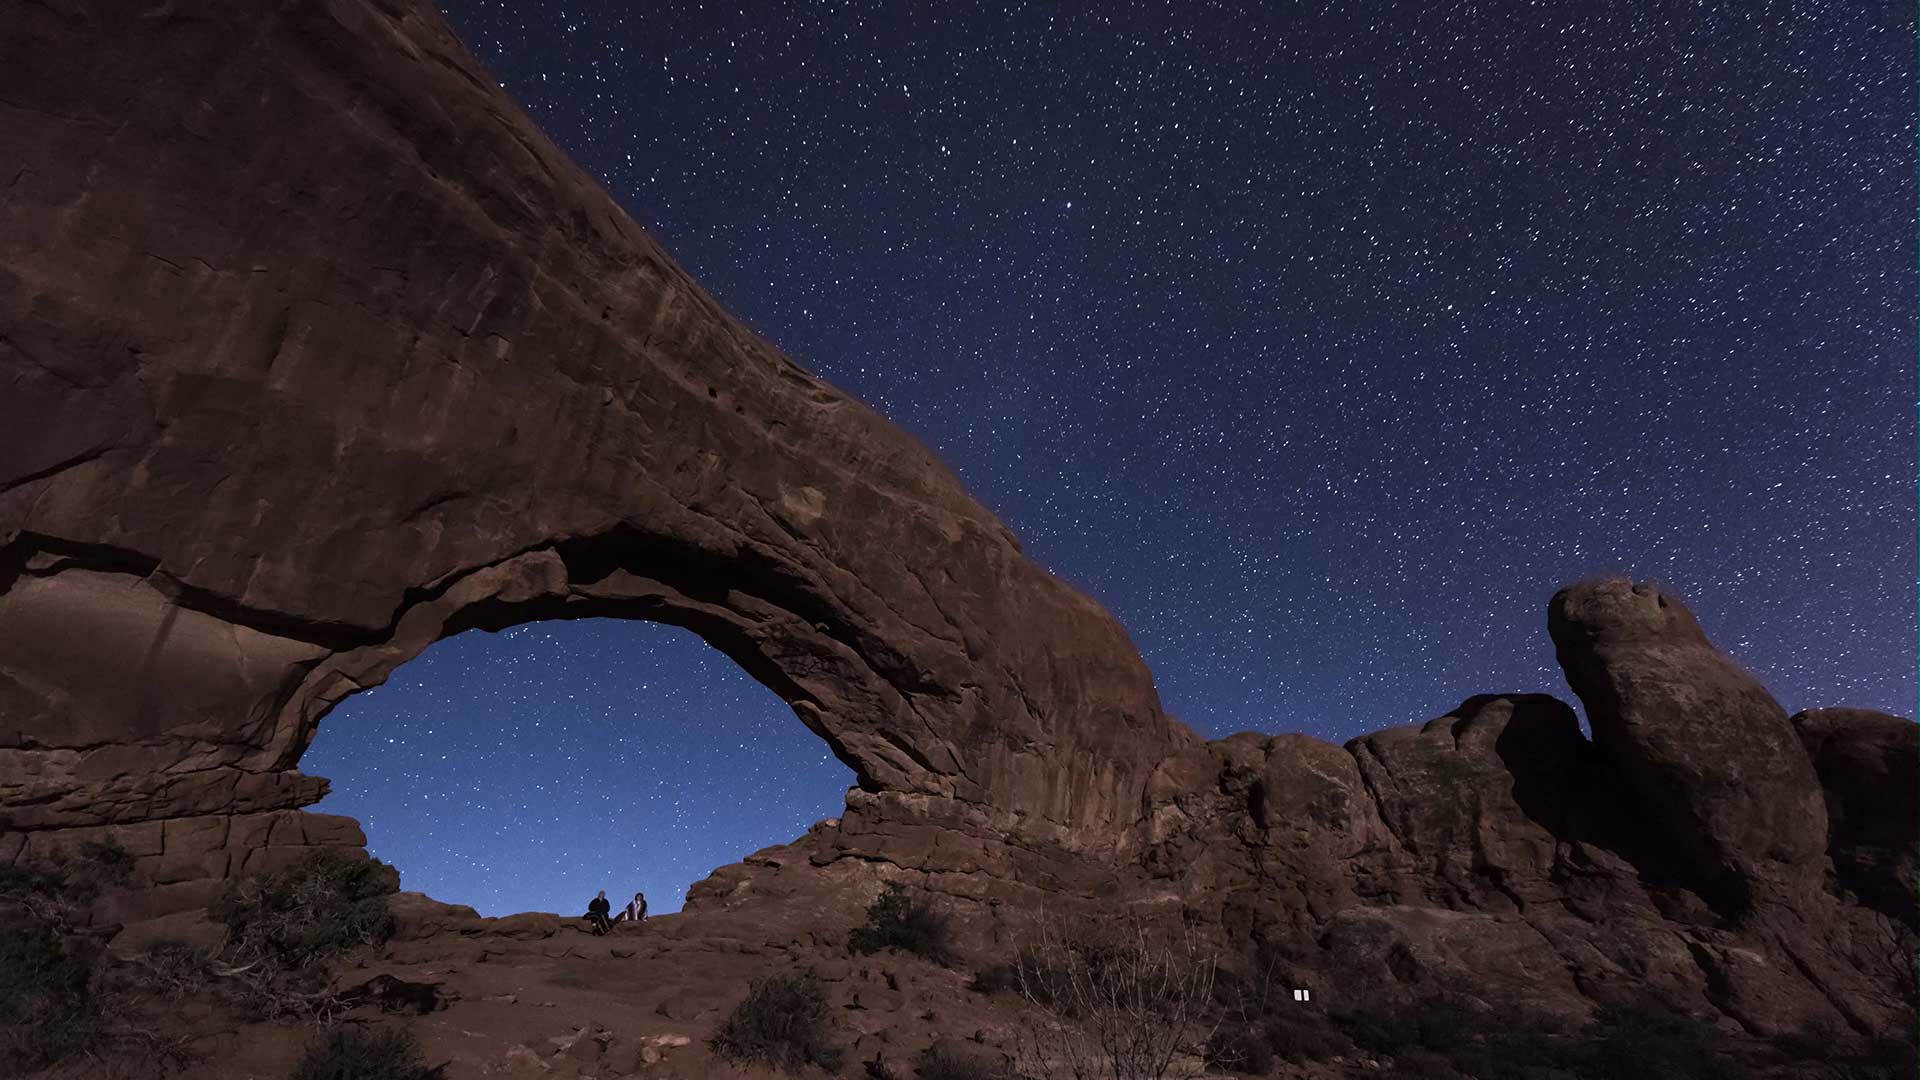 Windows District of Arches National Park at Night